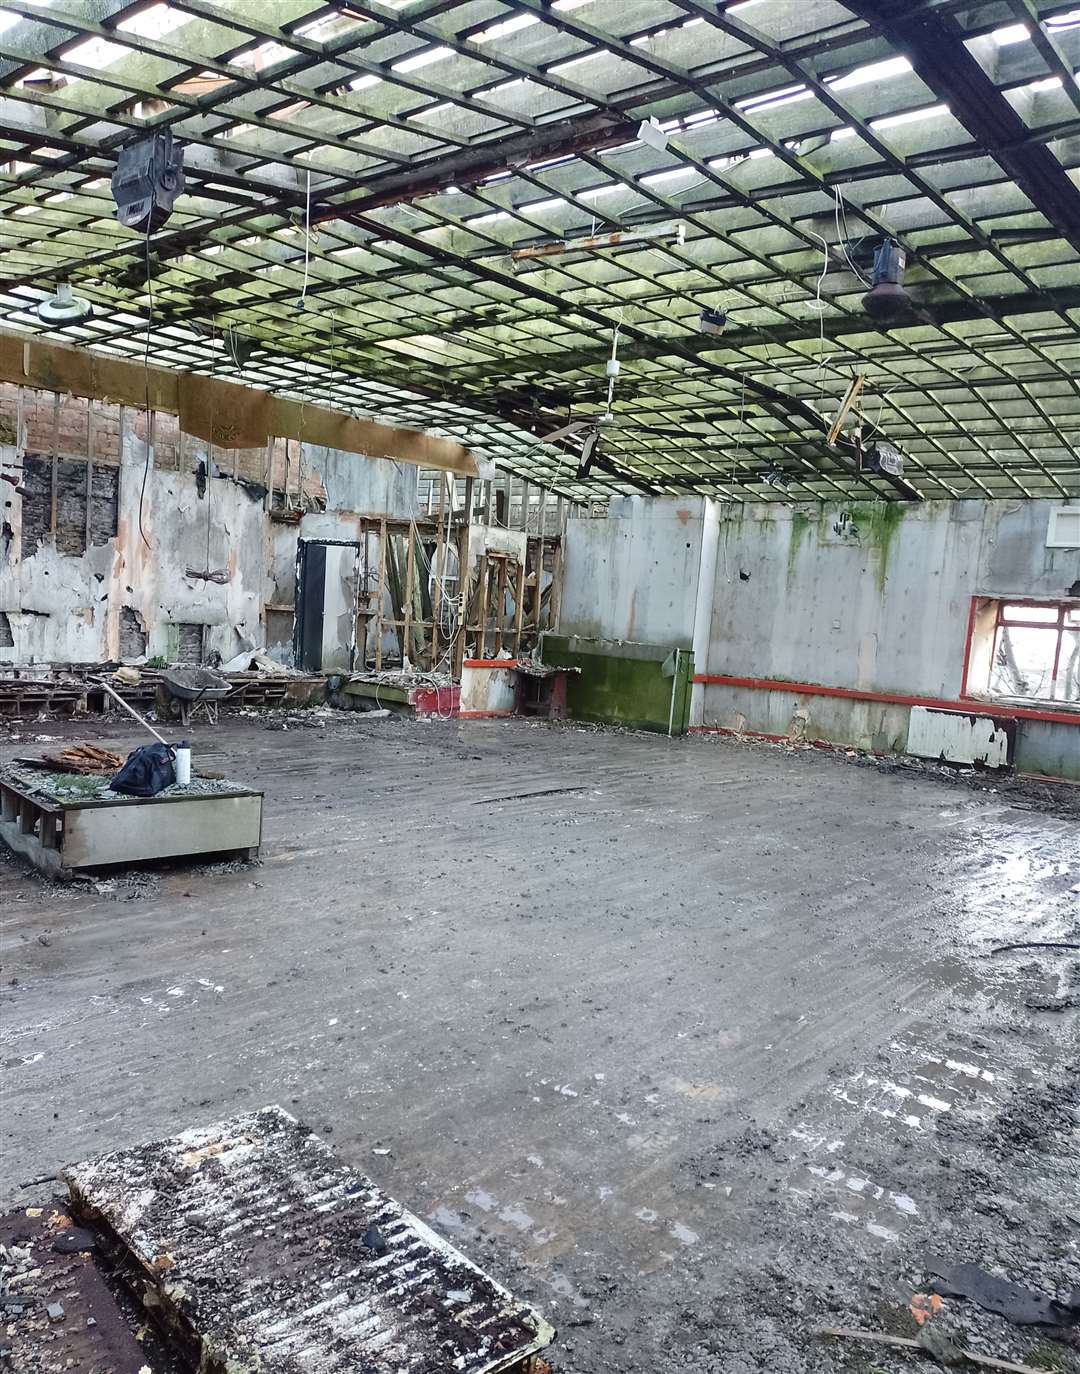 Inside the former Dounreay Social Club – one of the images submitted to Highland Council as part of the planning application.